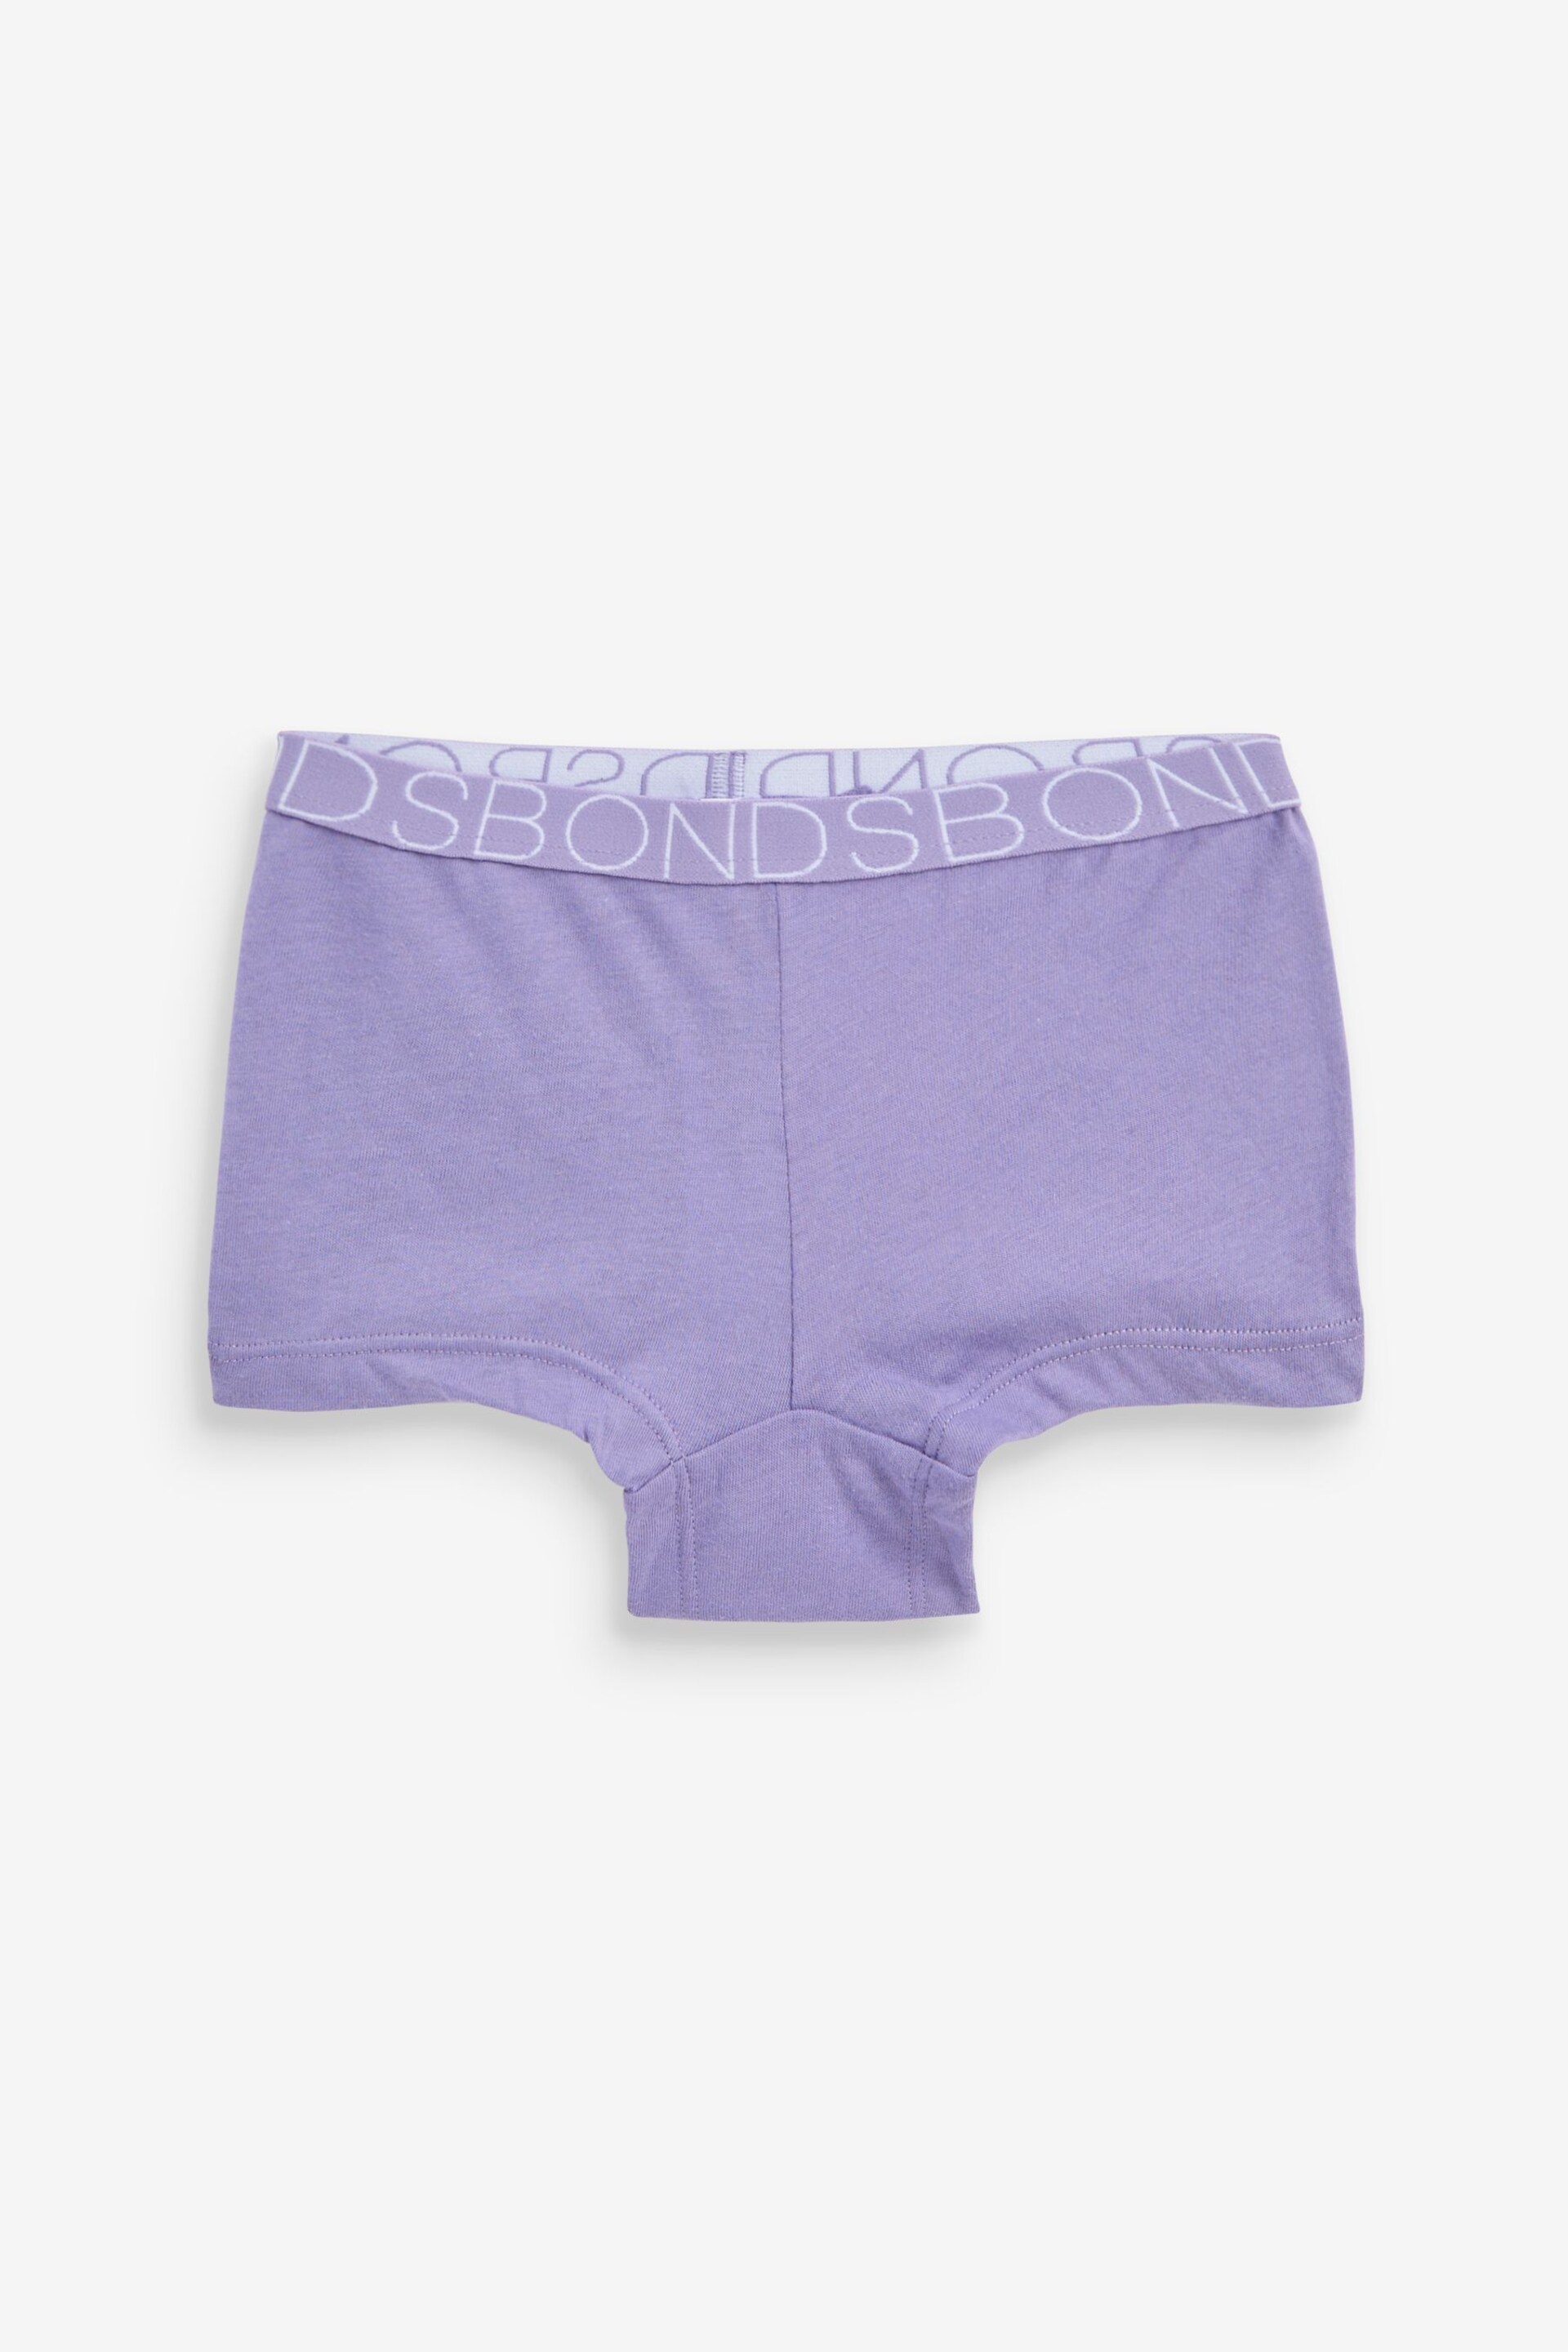 Bonds Purple Mixed Design Shortie knickers 5 Pack - Image 7 of 10